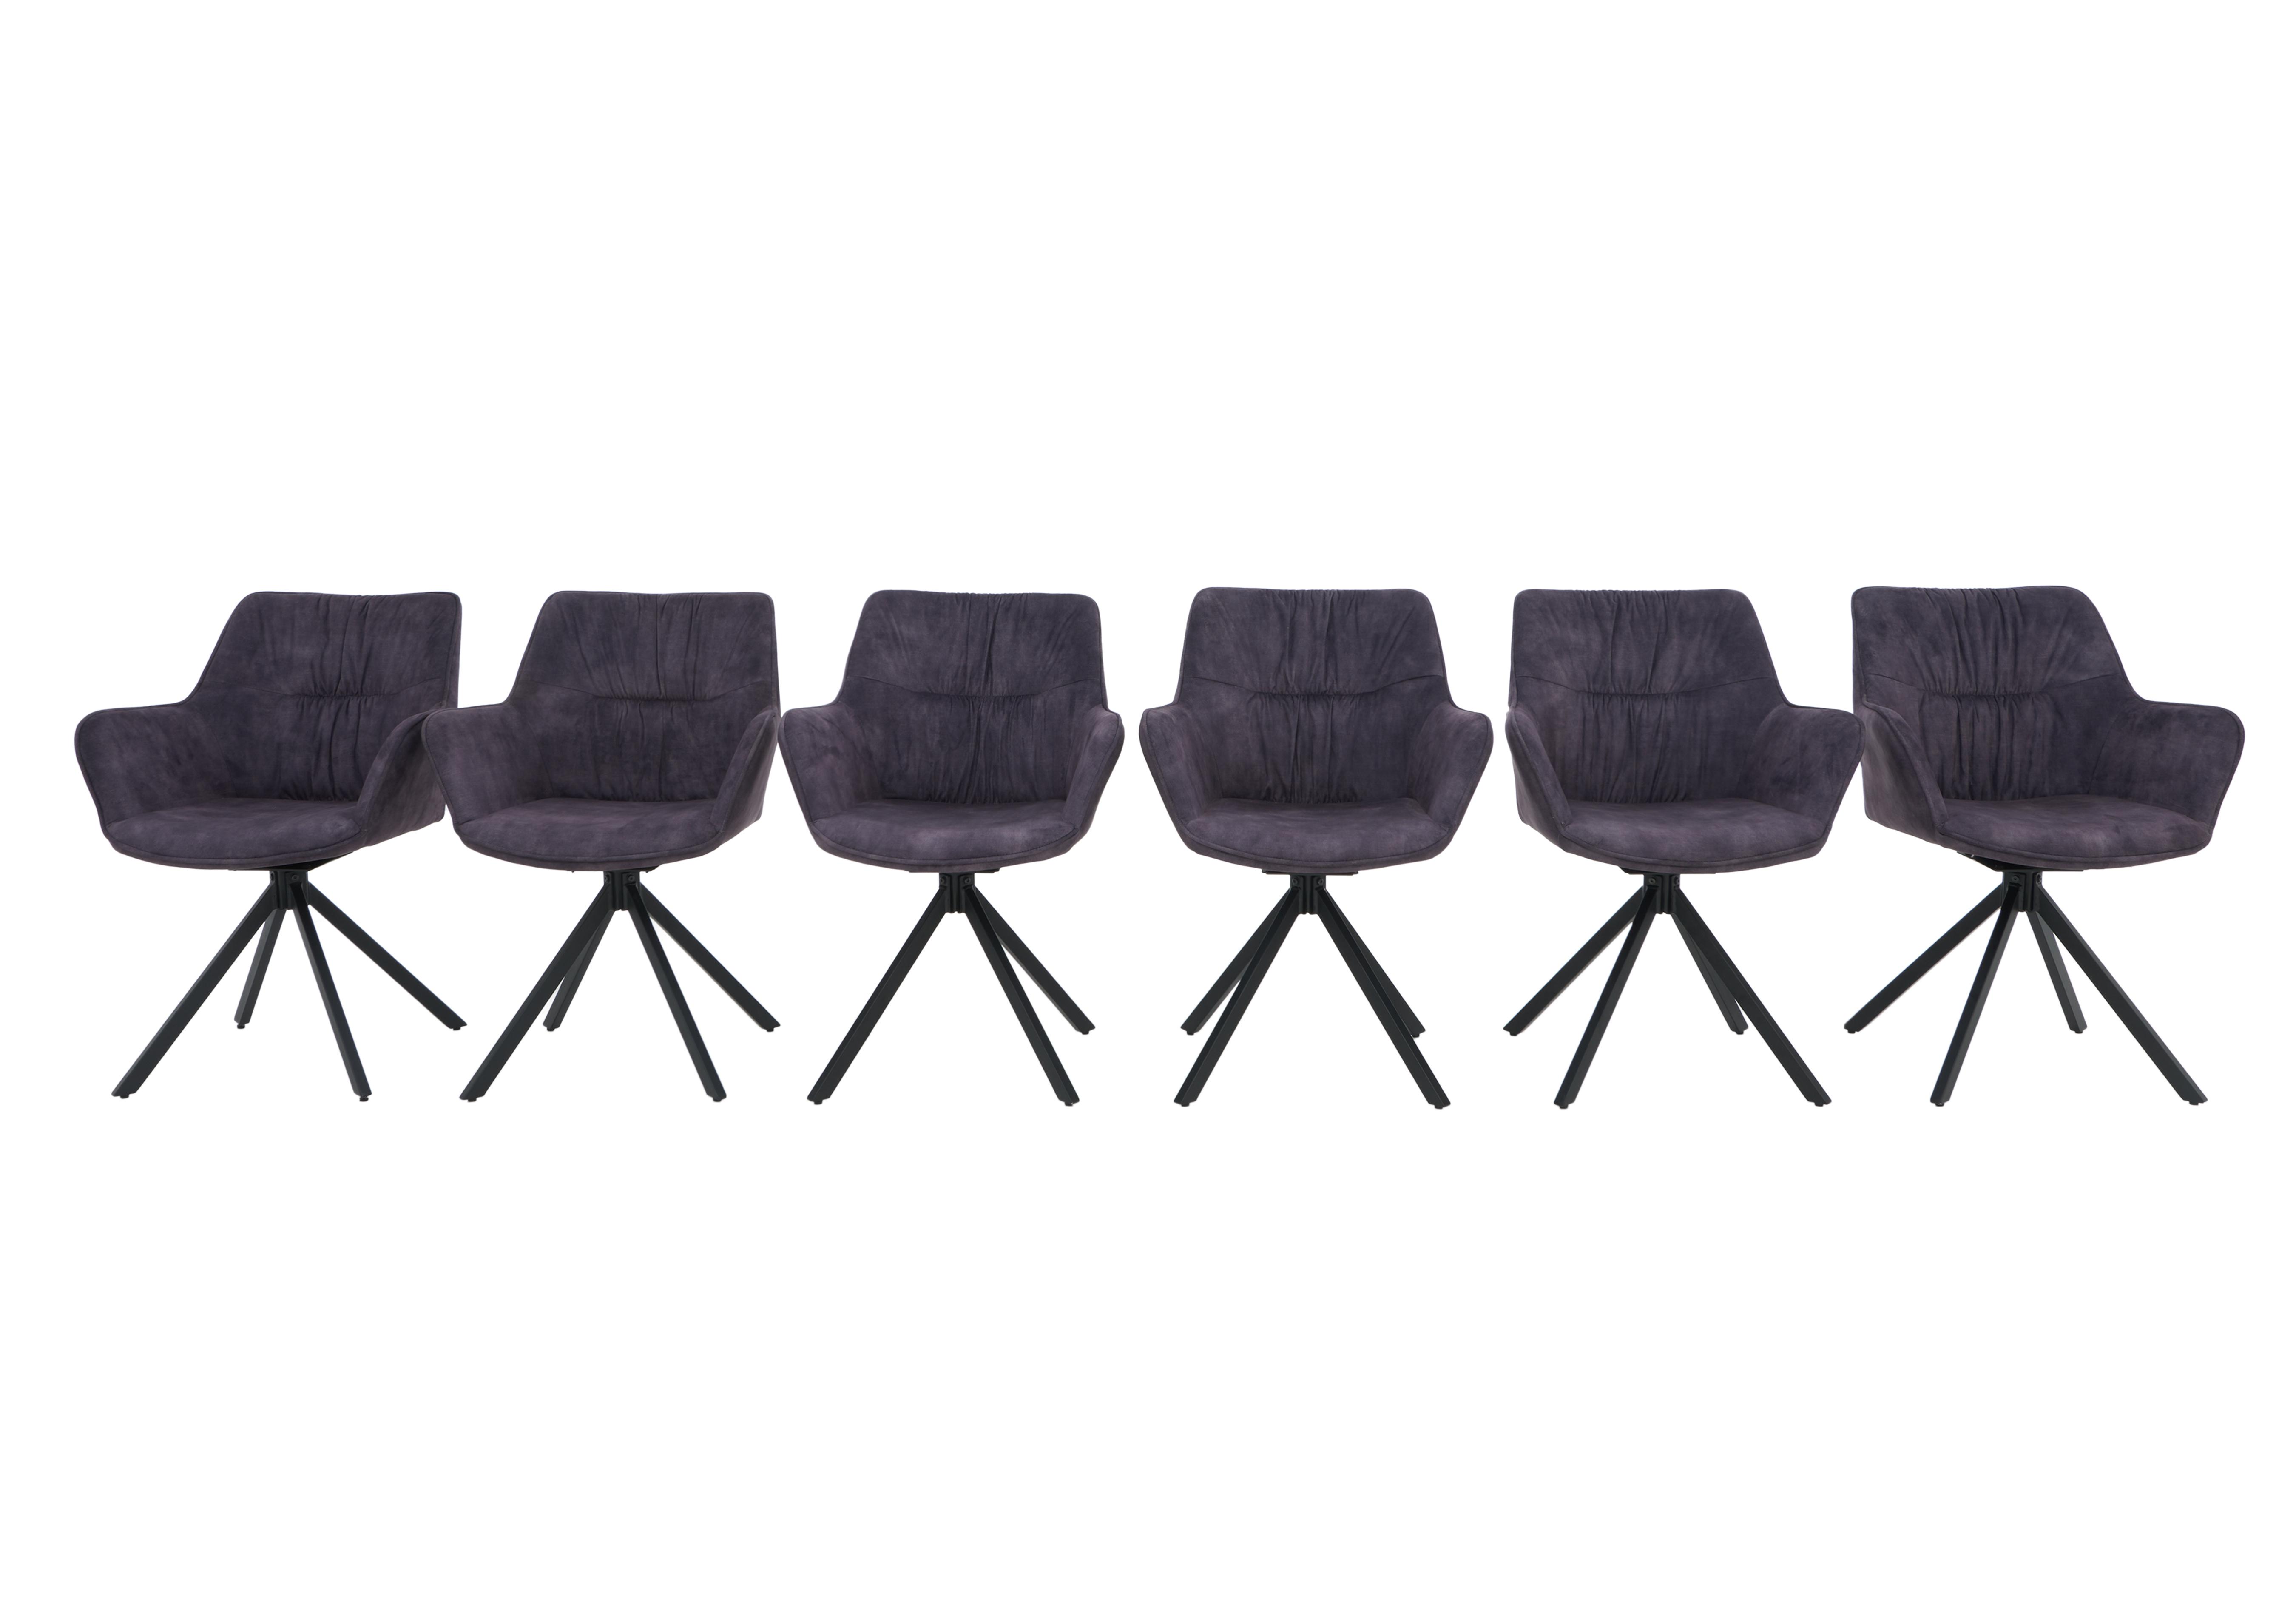 Marvel Black Set of 6 Swivel Dining Chairs in Charcoal on Furniture Village